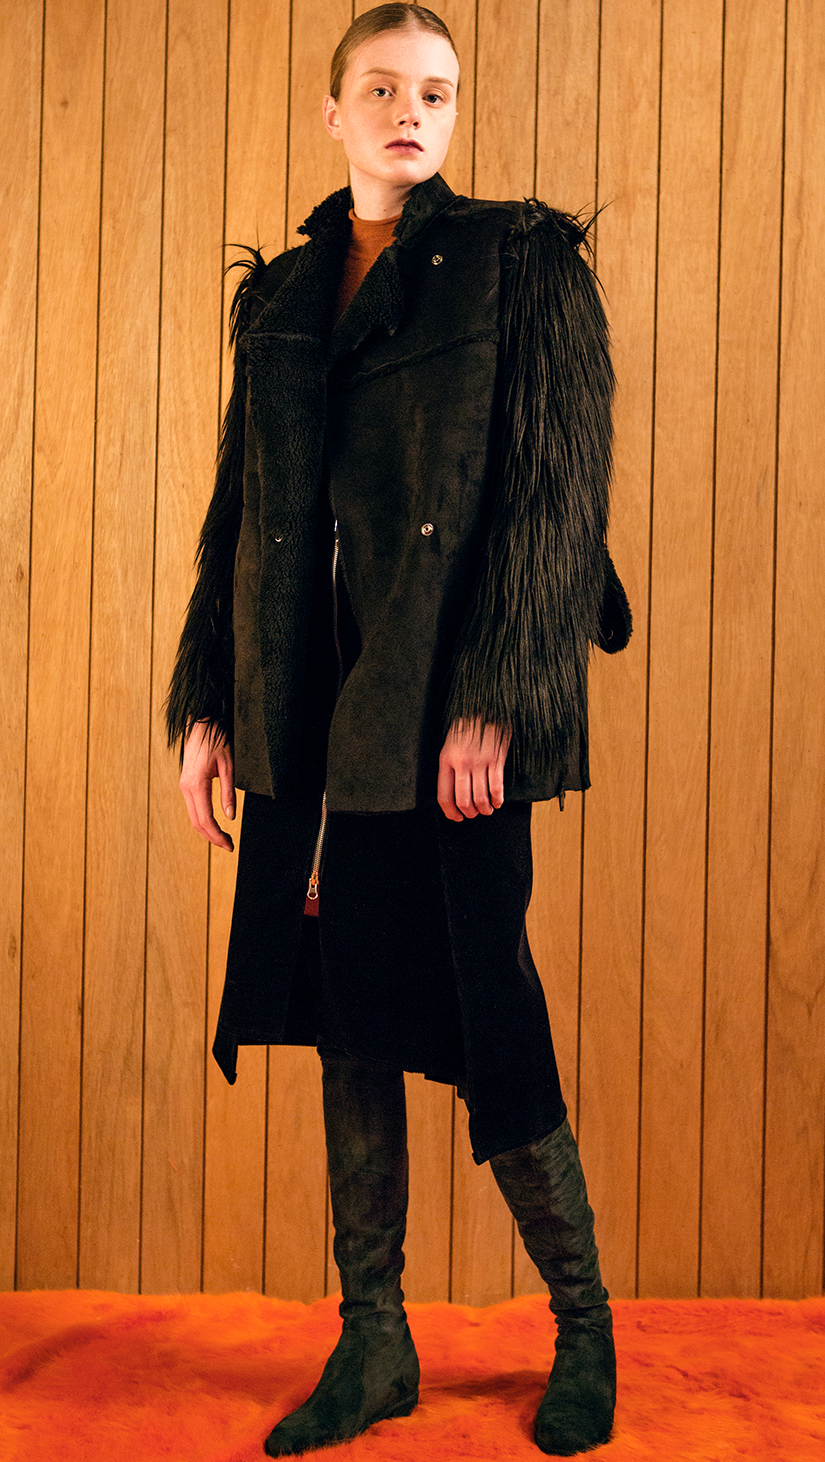 The Hanneli Shearling Jacket in Black. With a dramatic faux-Mongolian fur covered sleeves, front snap button closing, fully shearling lining. Oversized silhouette.  